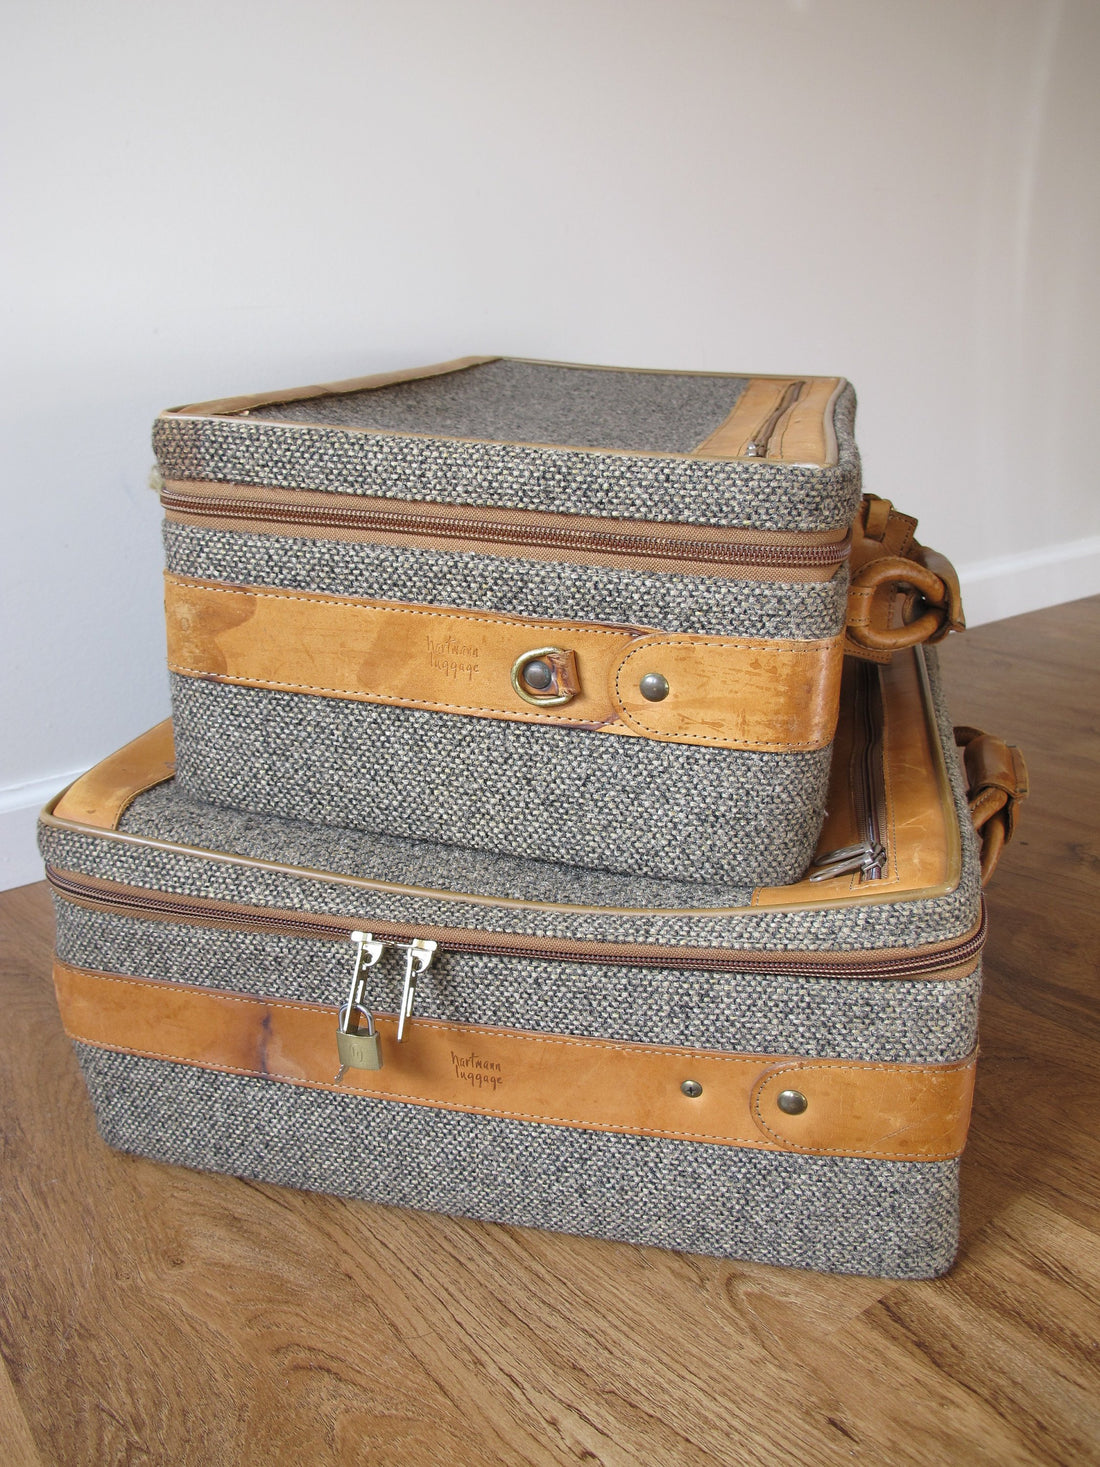 2 Vintage Hartmann Gray Suitcases with Leather Accents (SOLD SEPERATELY)